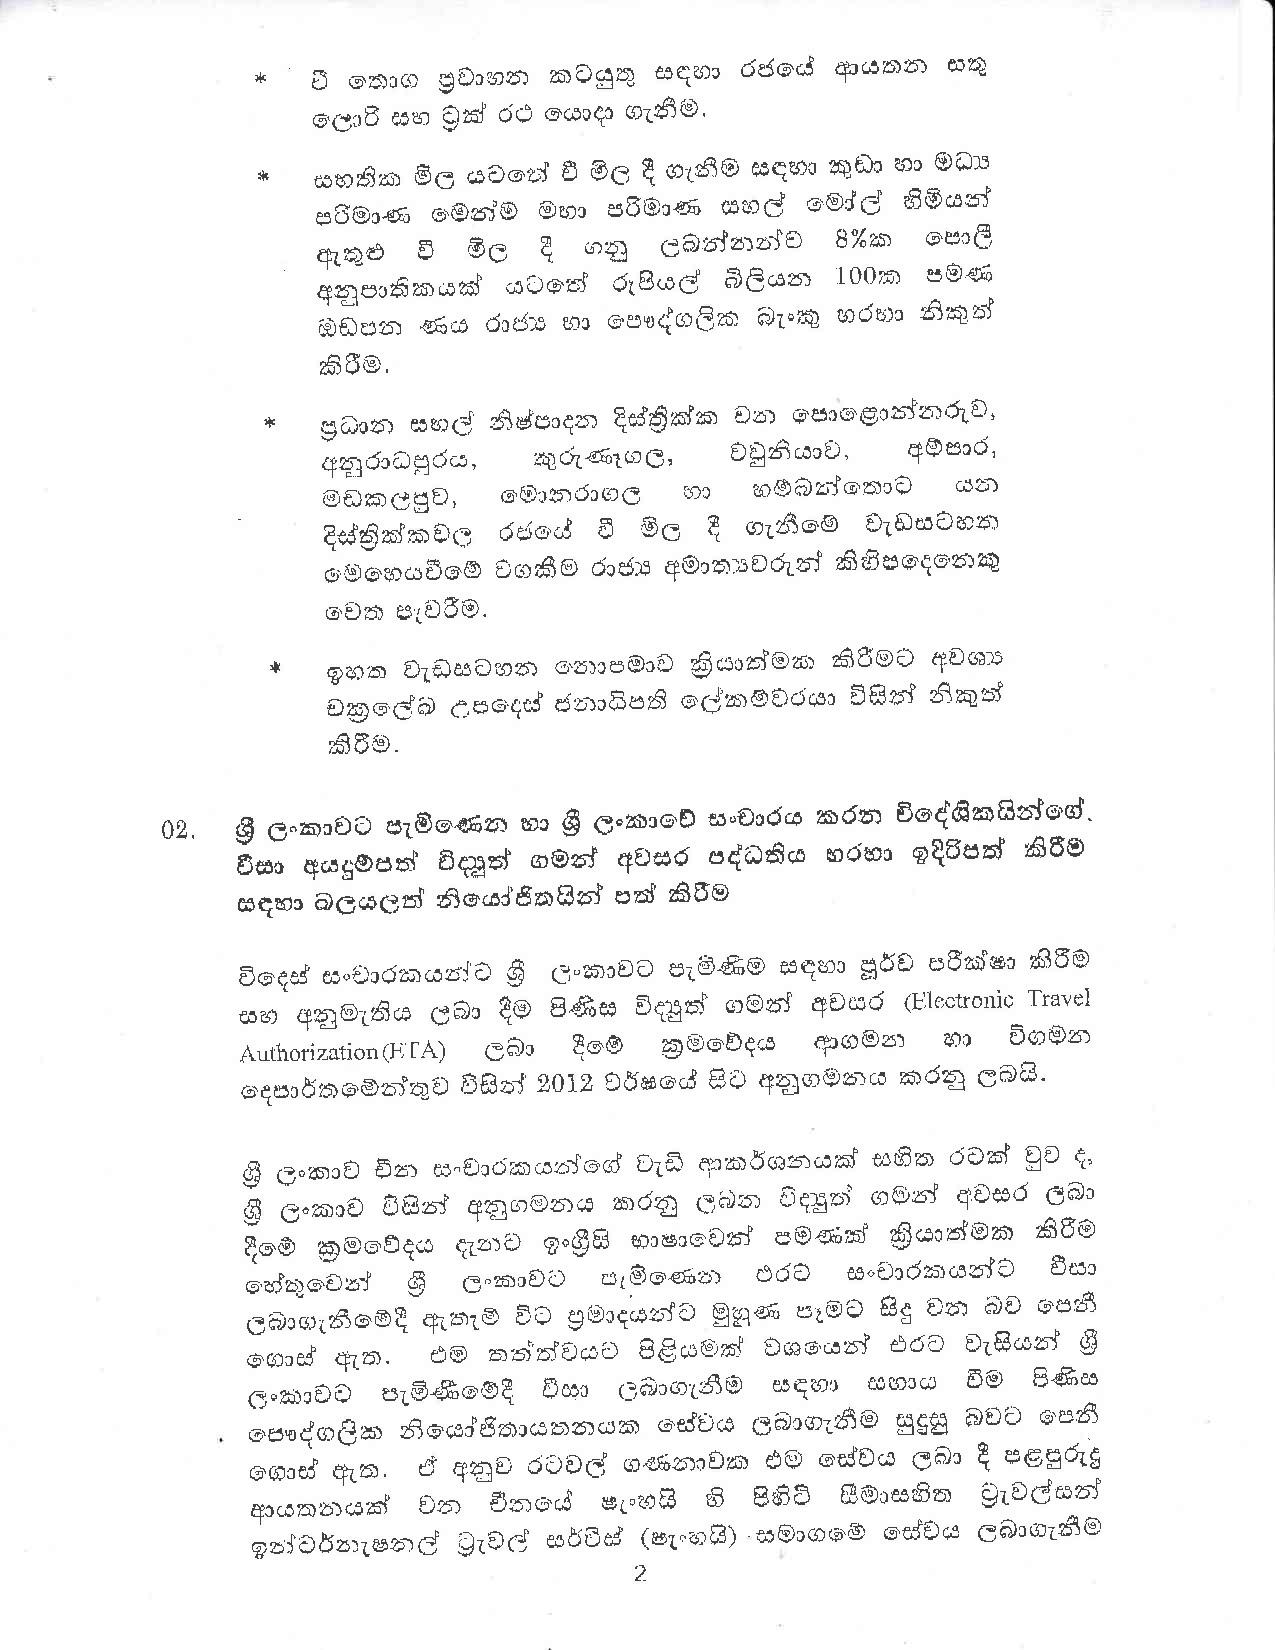 Cabinet Decision on 22.01.2020Full document page 002